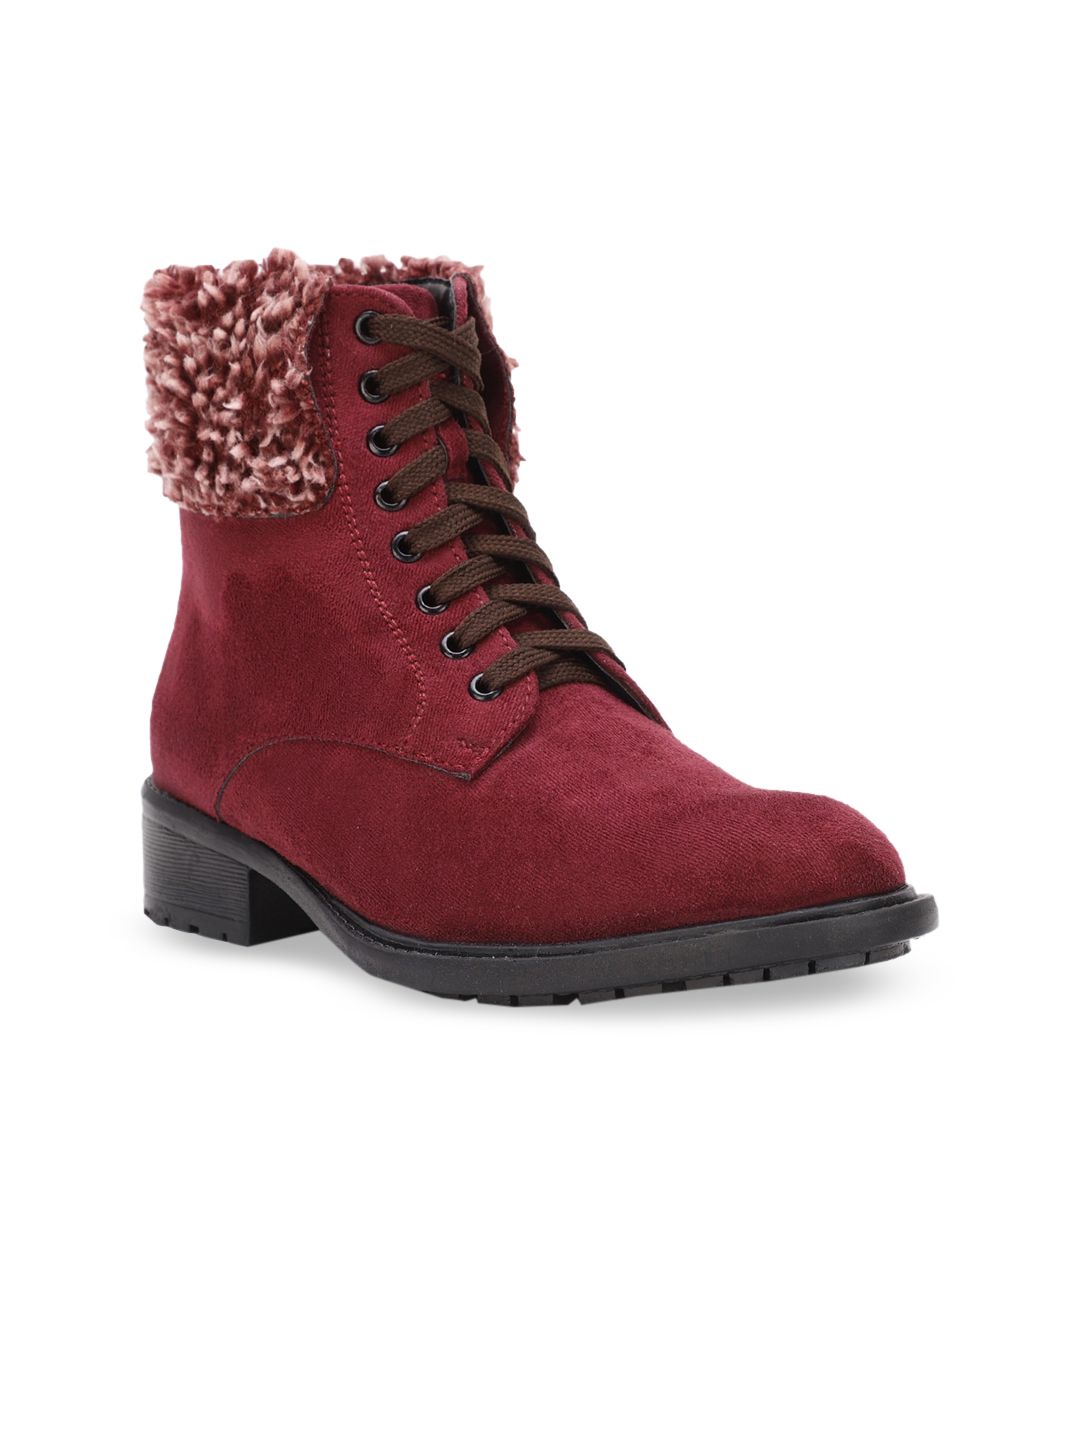 Bruno Manetti Women Red Solid Suede Heeled Boots Price in India